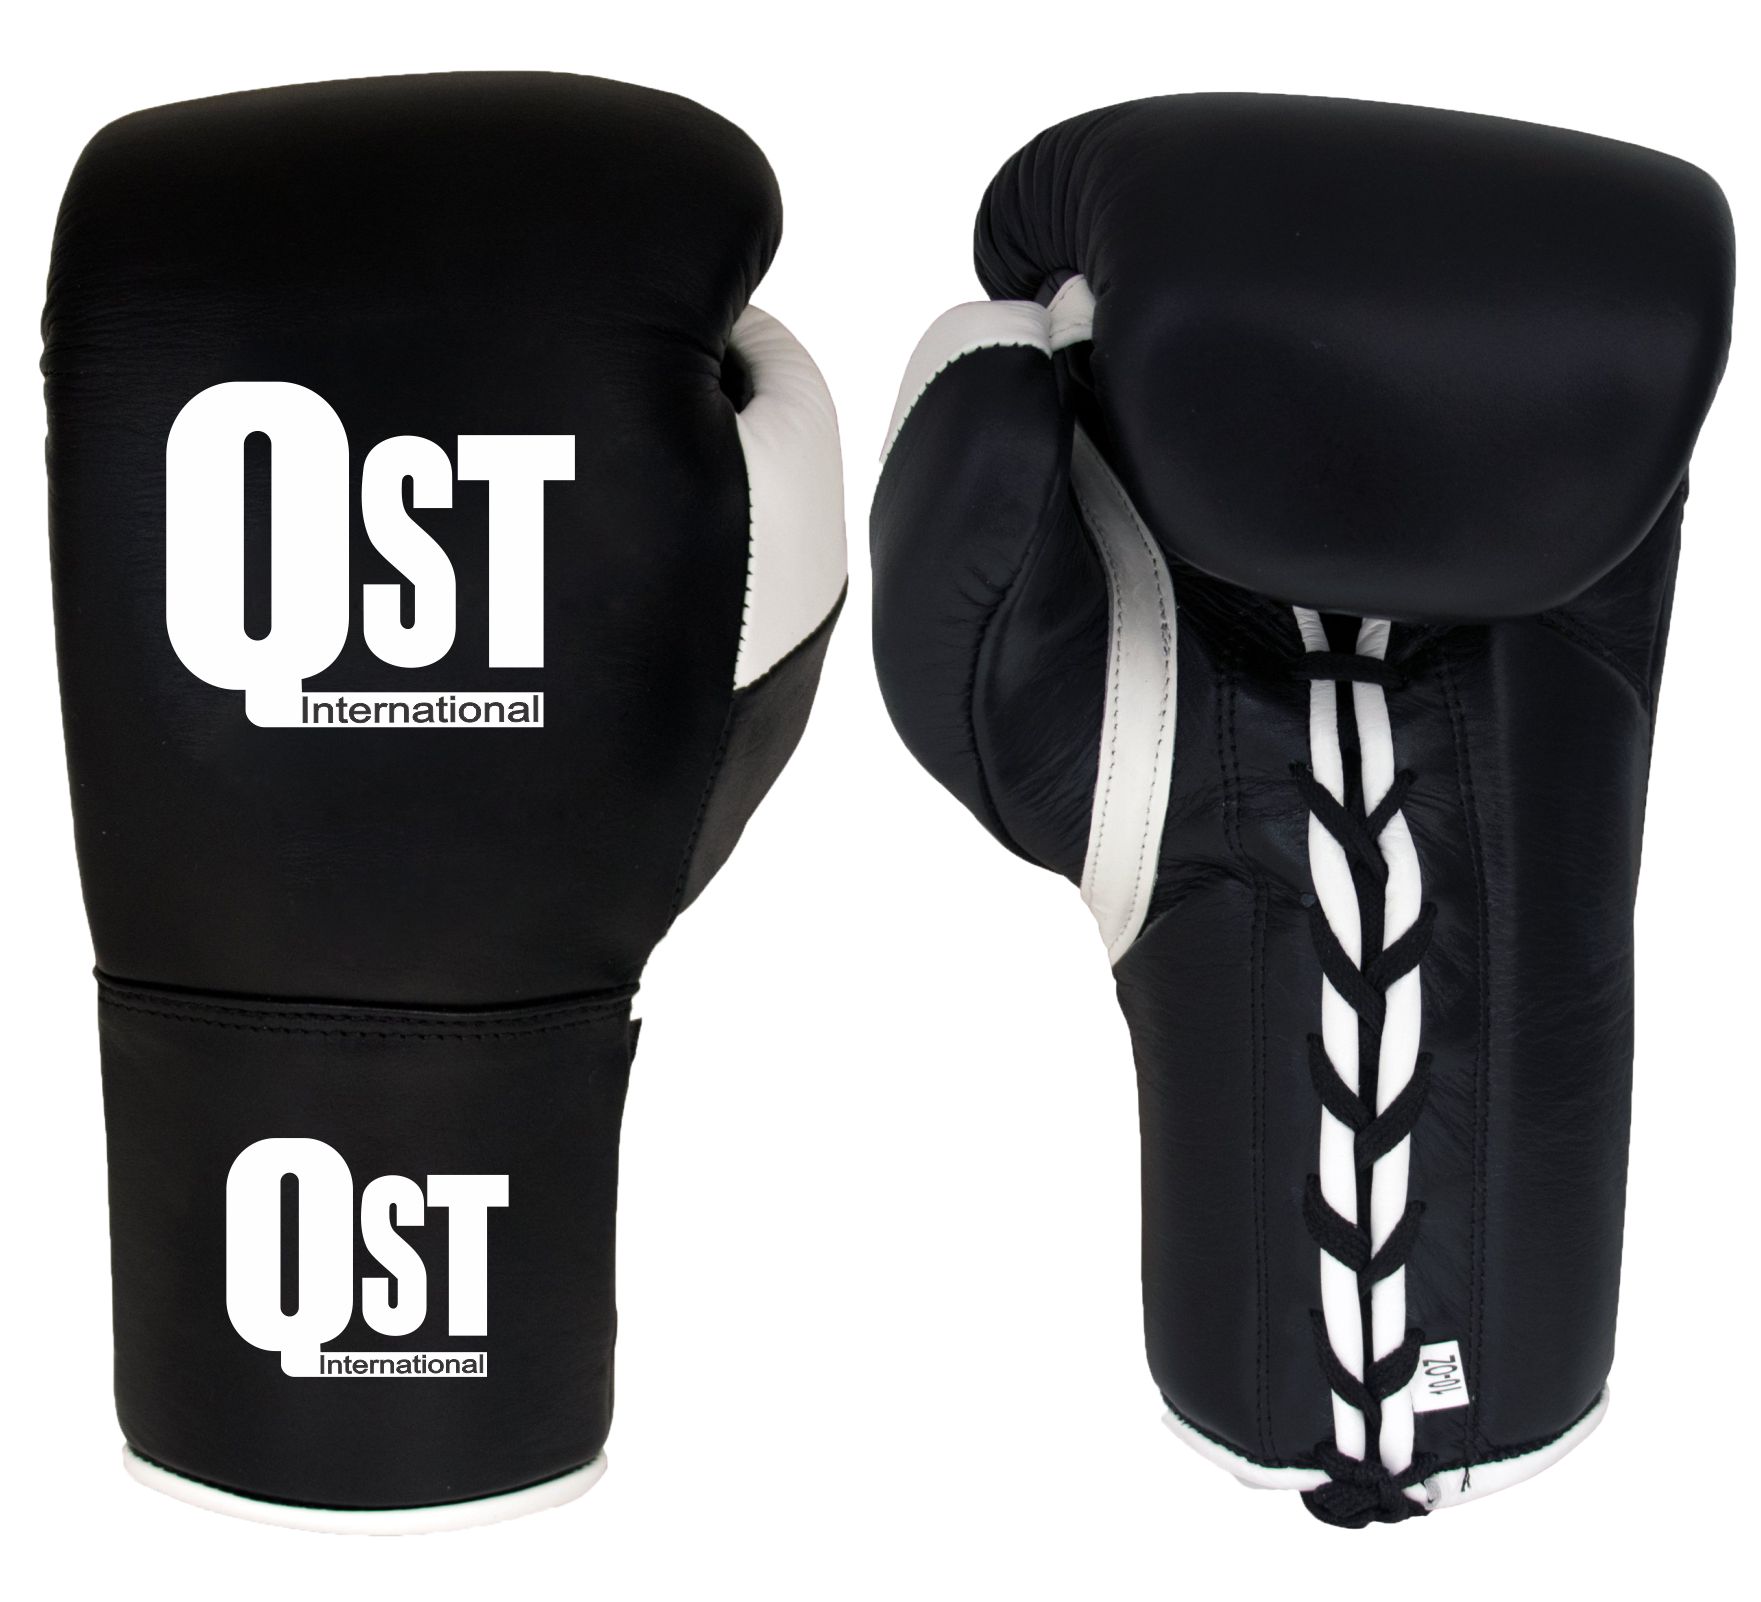 Lace up Boxing Gloves - PRG-3258